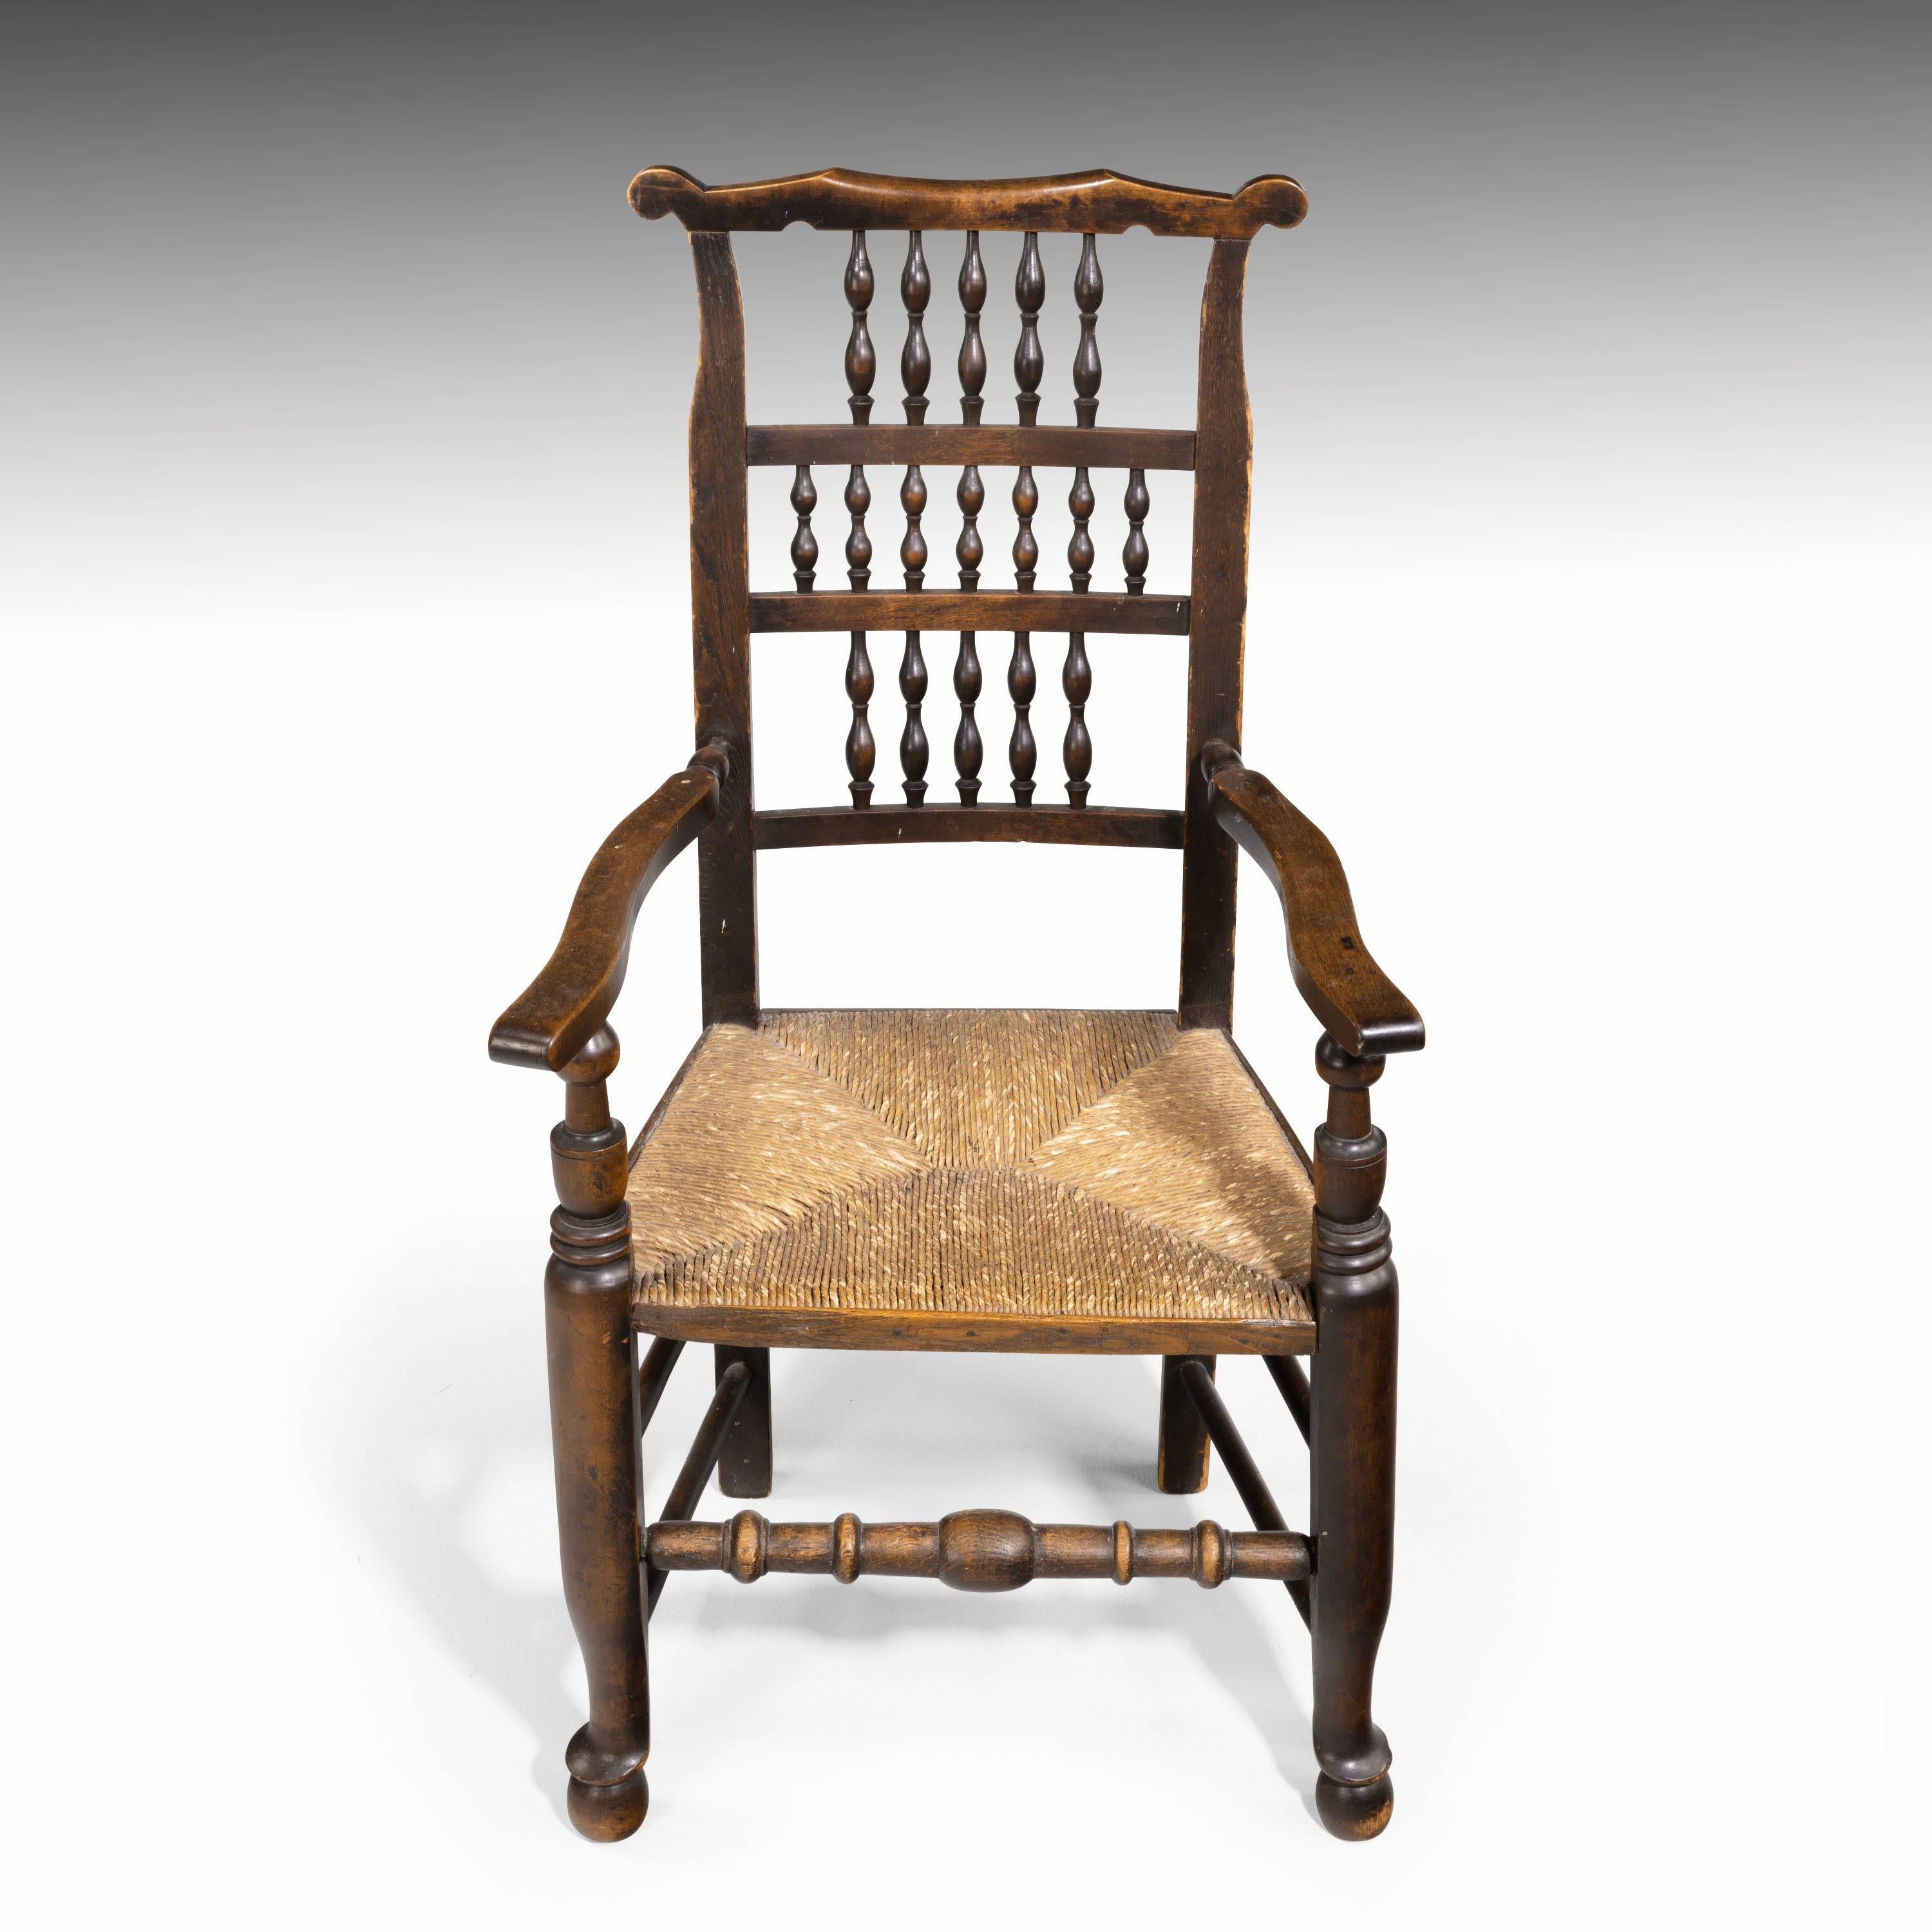 An attractive elm spindle back armchair with a rush seat, mid-19th century. Excellent overall conditional and patina, measures: Seat height 17.5